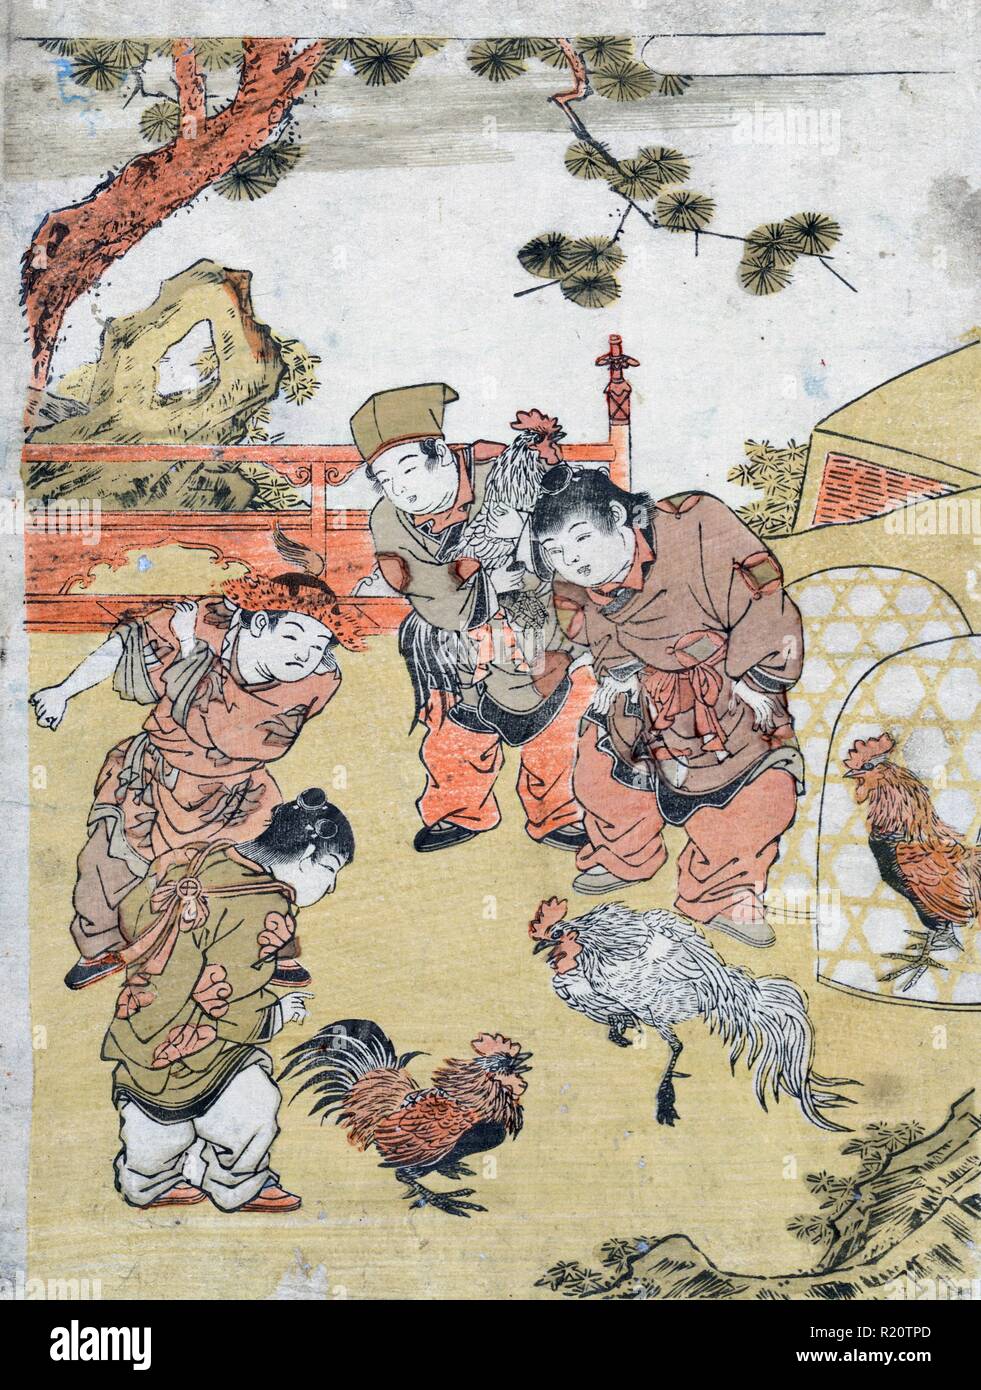 Colour woodcut titled 'Karako no tokei' depicts Chinese children fighting chickens. Created by Shigemasa Kitao (1739-1820) Dated 1773 Stock Photo